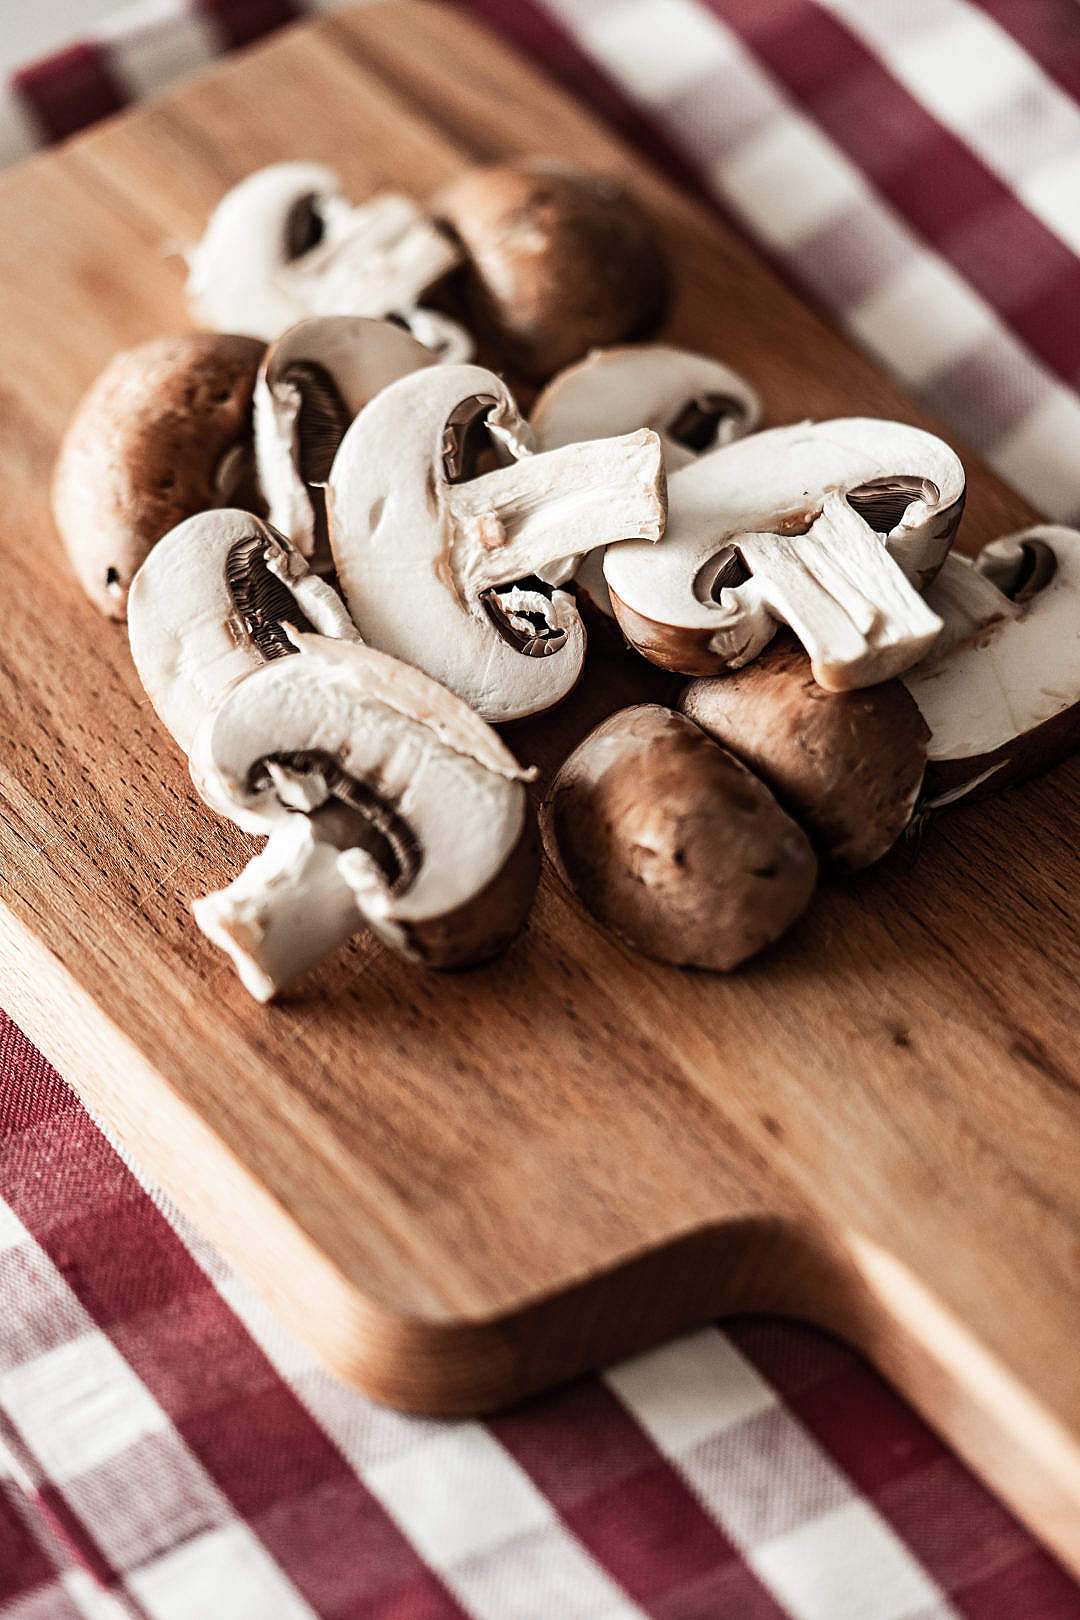 Download Slices of Mushrooms Vertical FREE Stock Photo